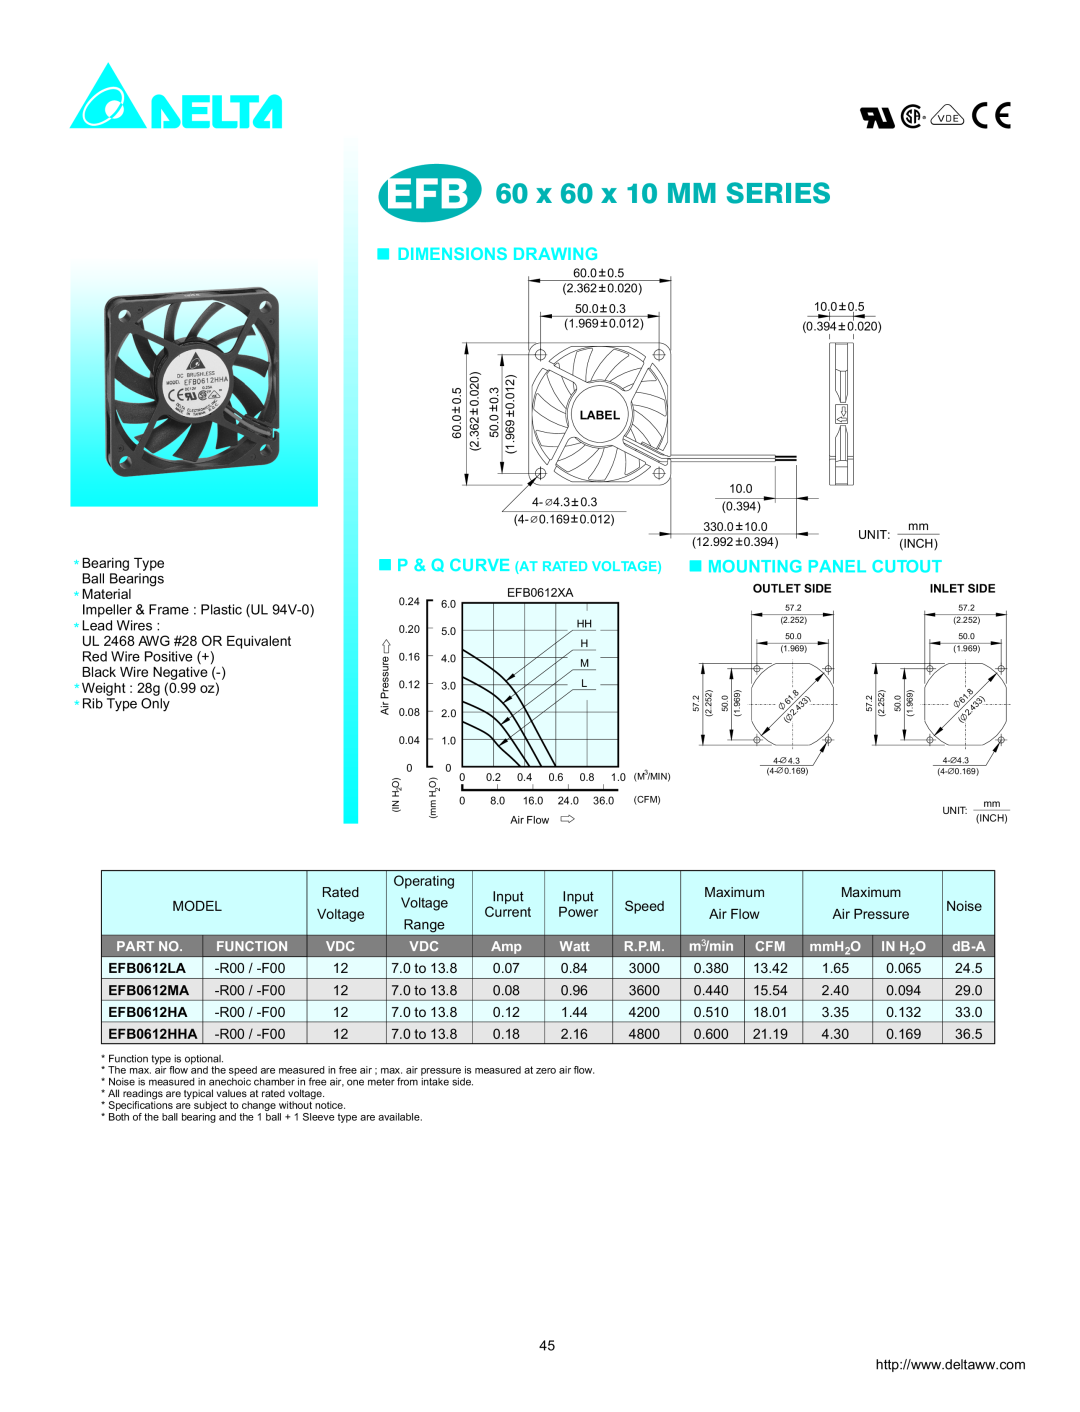 Delta Electronics EFB0612HA dimensions EFB 60 x 60 x 10 MM SERIES, Dimensions Drawing, Mounting Panel Cutout, Function 